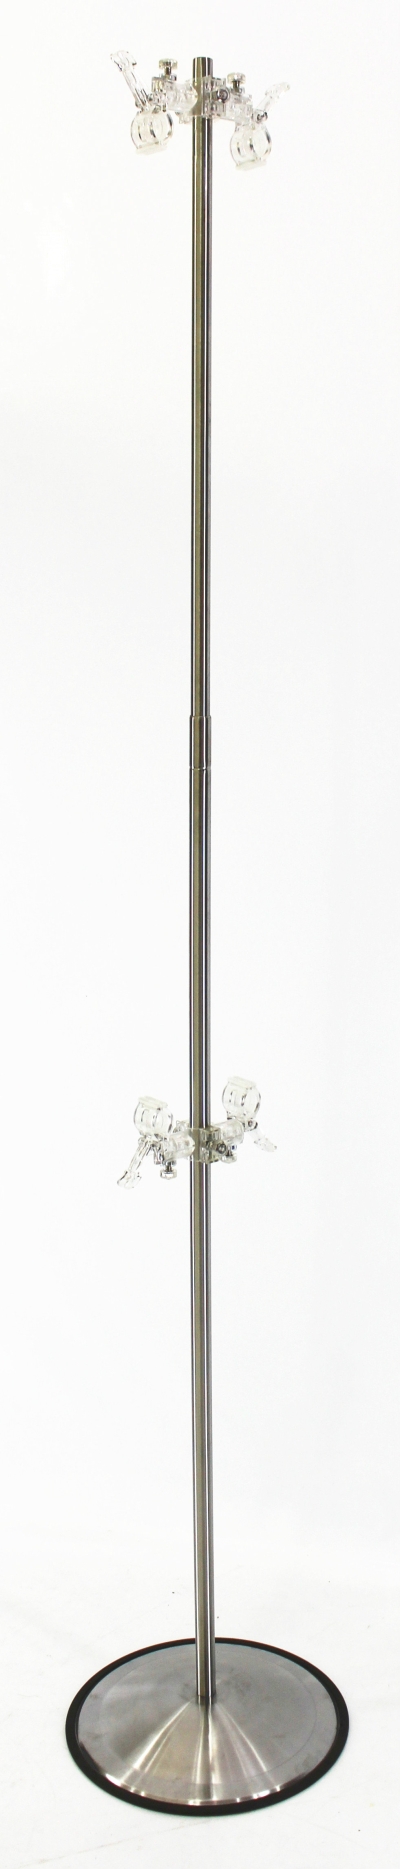 604102 - POSTER STAND ROUND BASE w 2 CLIPS (E09)